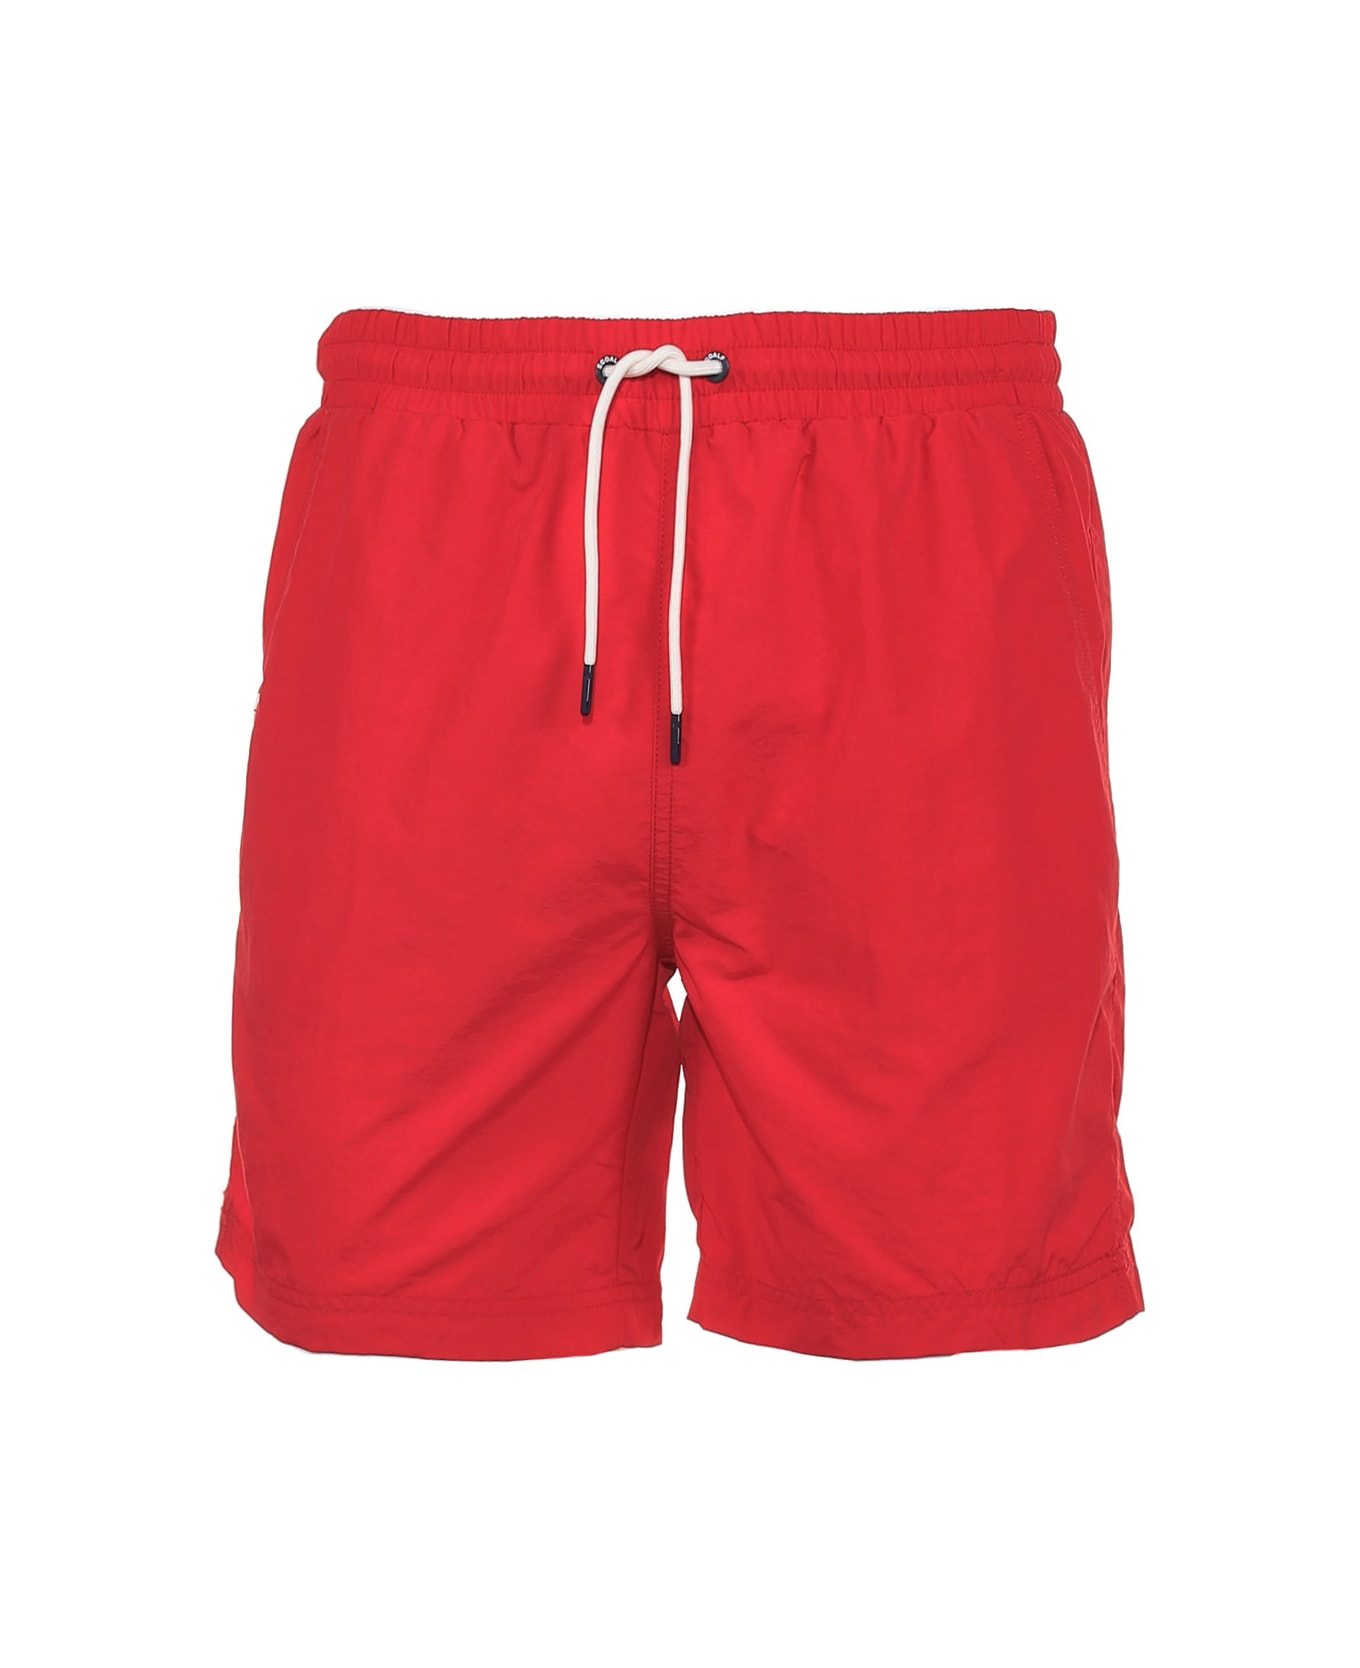 Ecoalf Swimsuit With Drawstring At The Waist - BRIGHT RED 水着